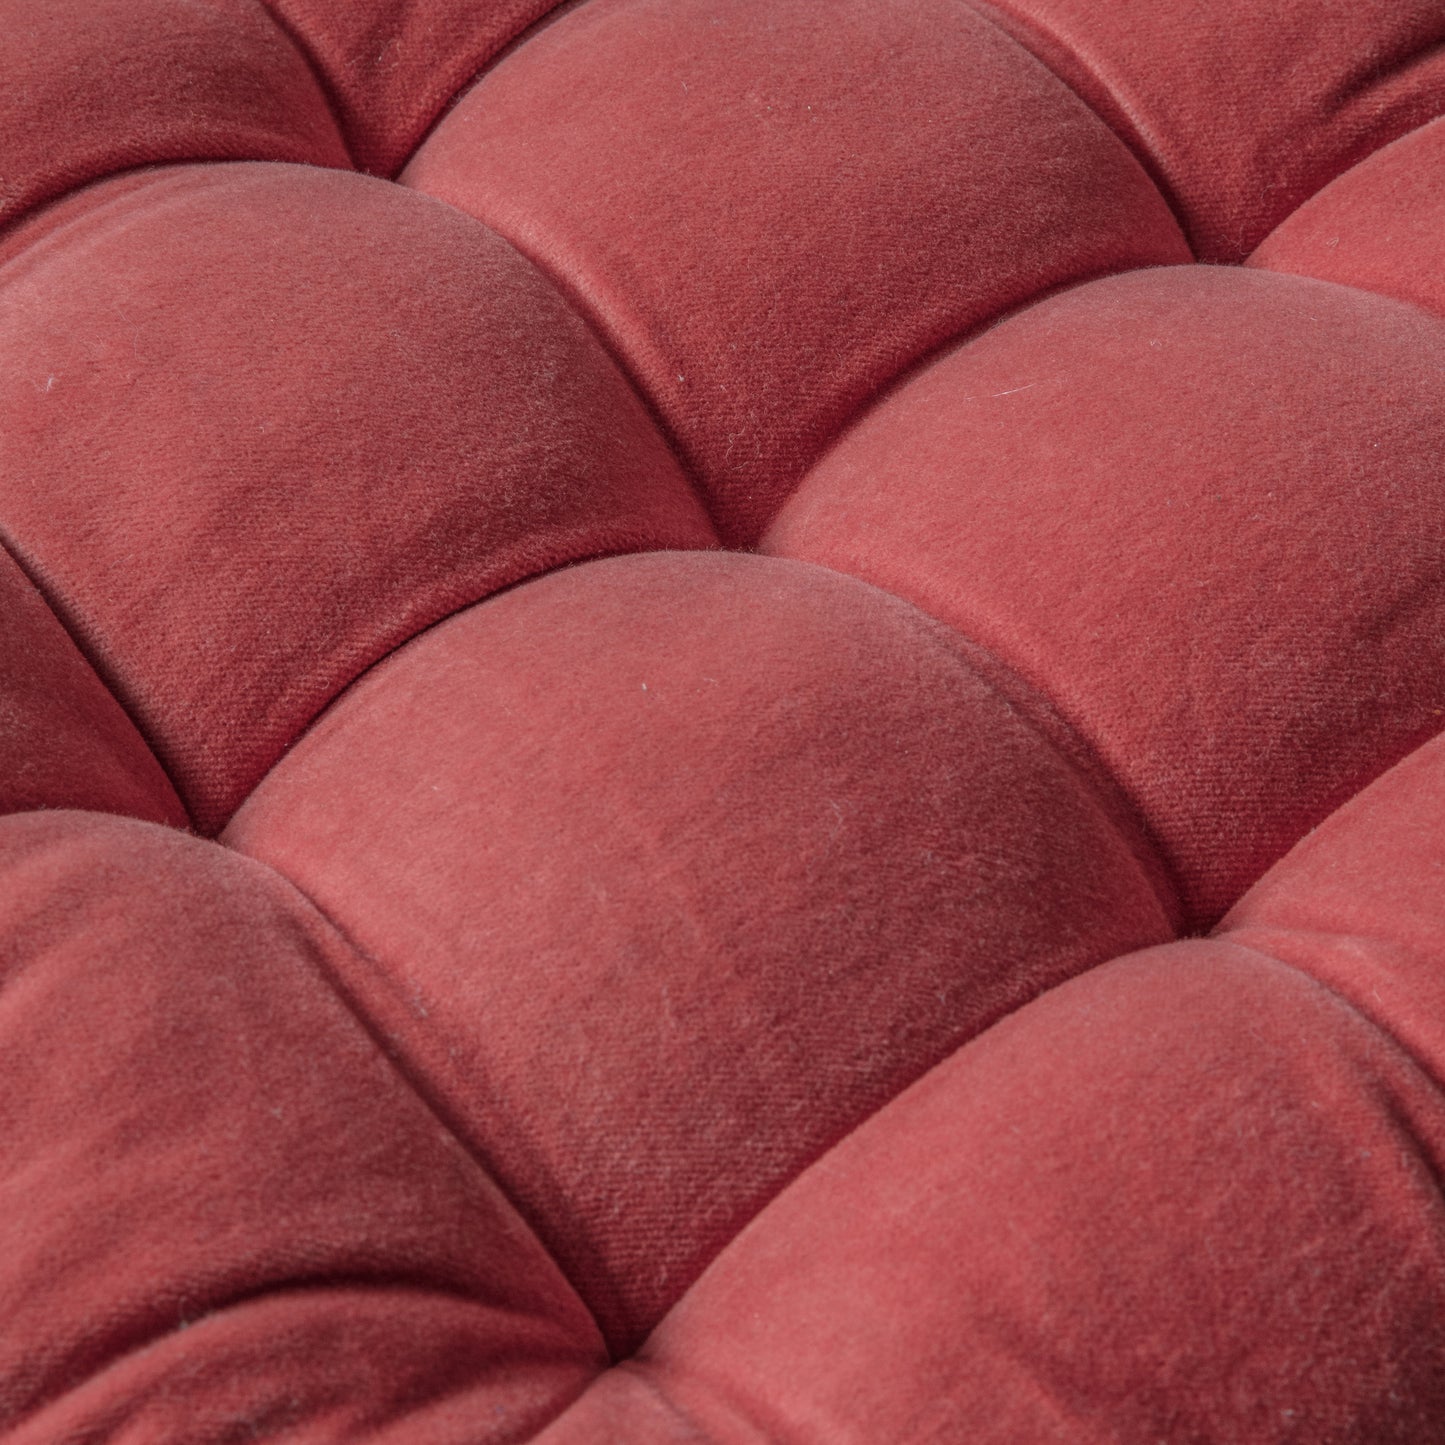 A close up of a Cotton Velvet Seatpad Coral 430x430mm for interior decor.